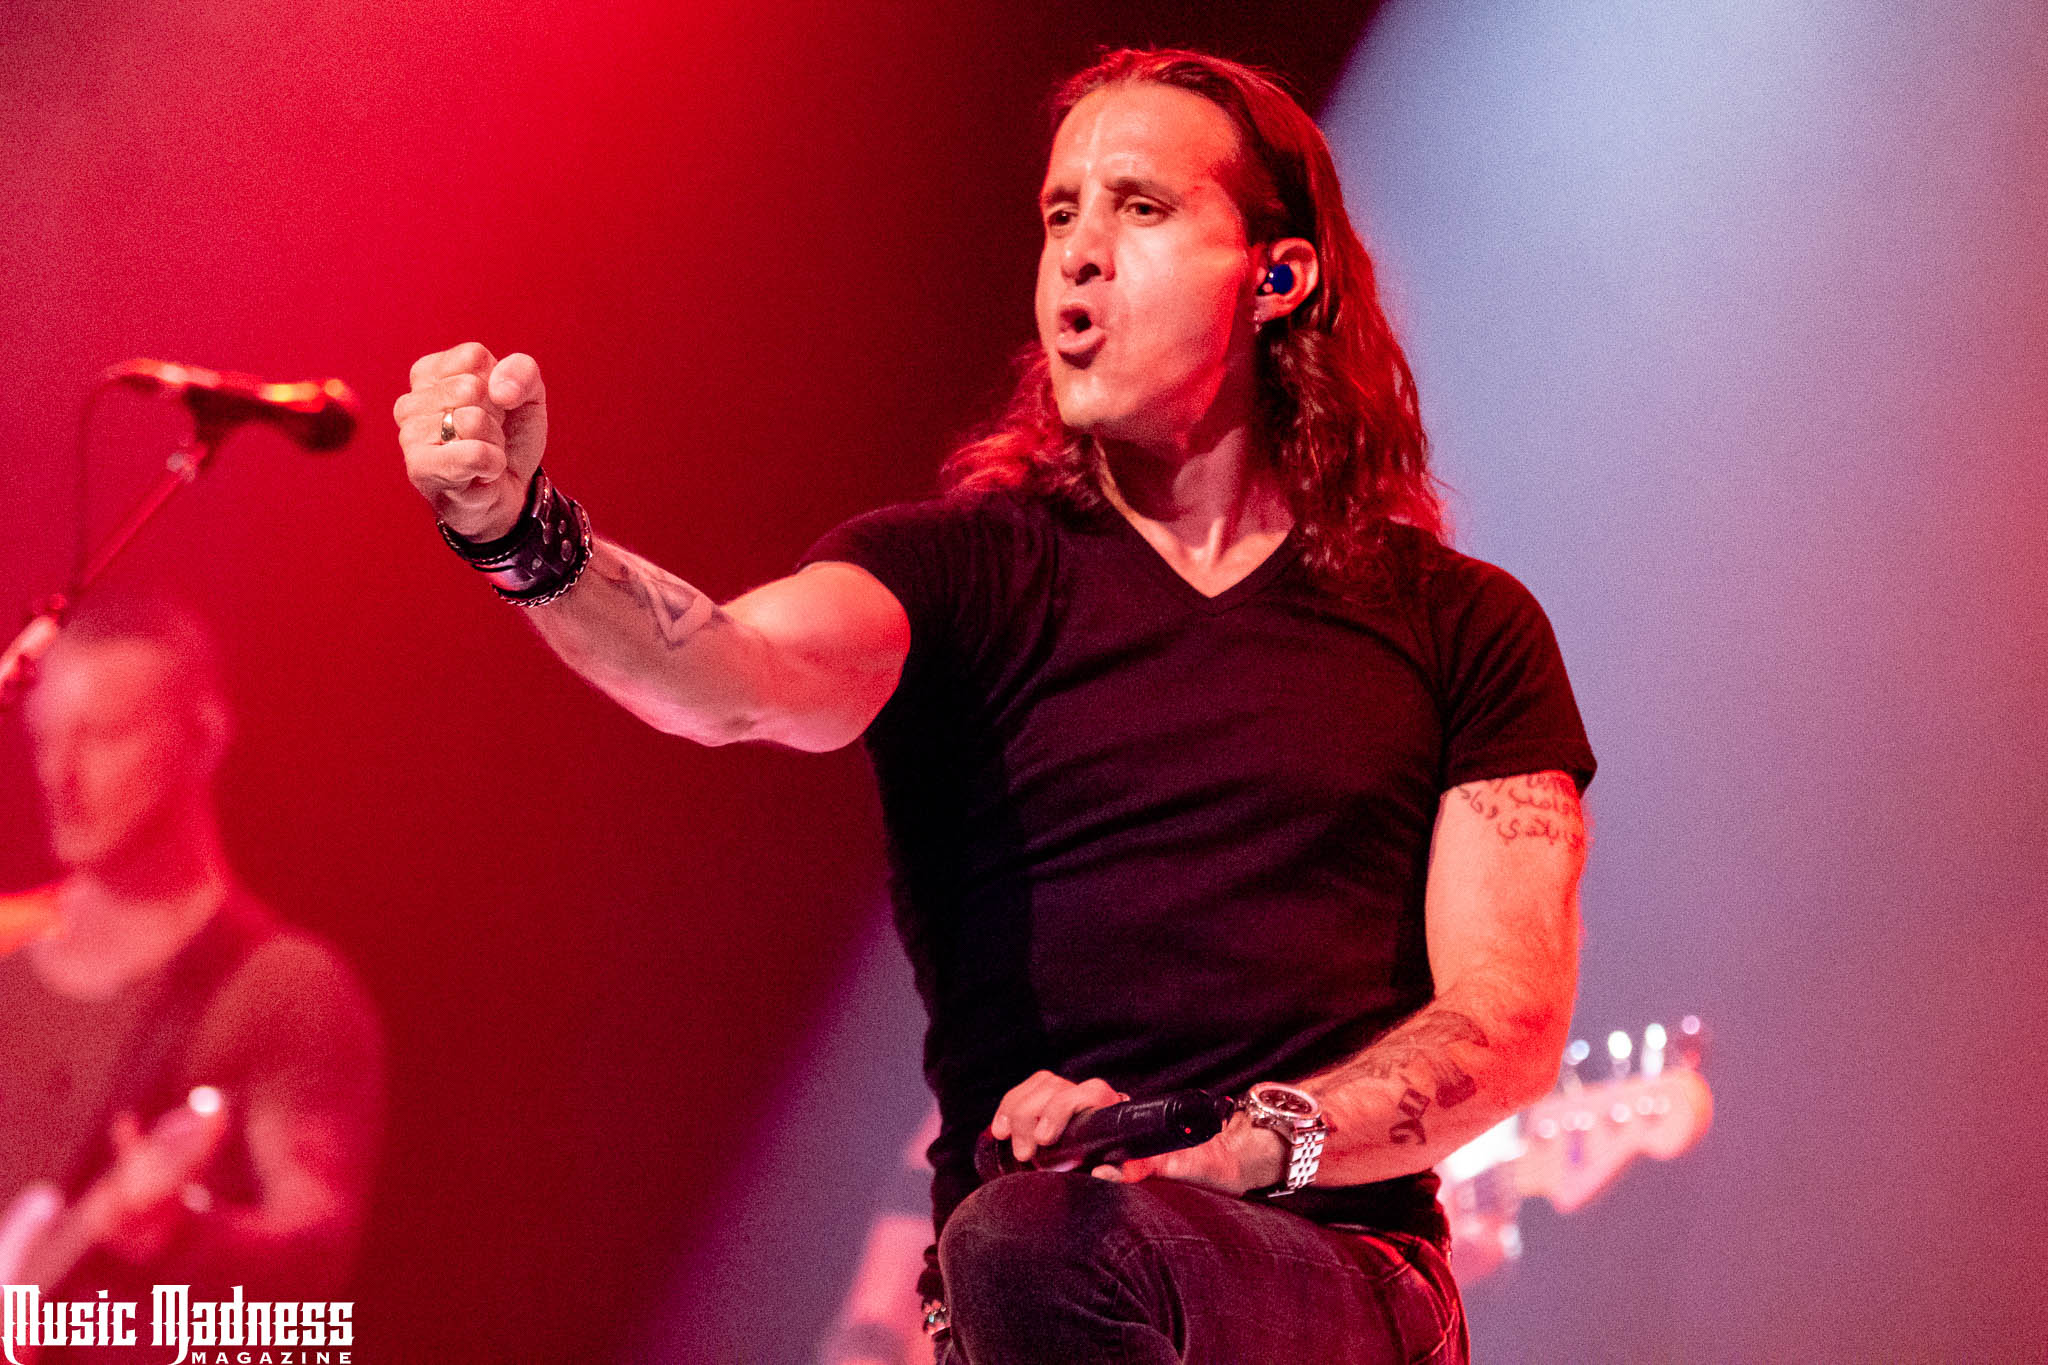 Scott Stapp The Voice Of Creed Finding His Solo Way Music Madness Magazine